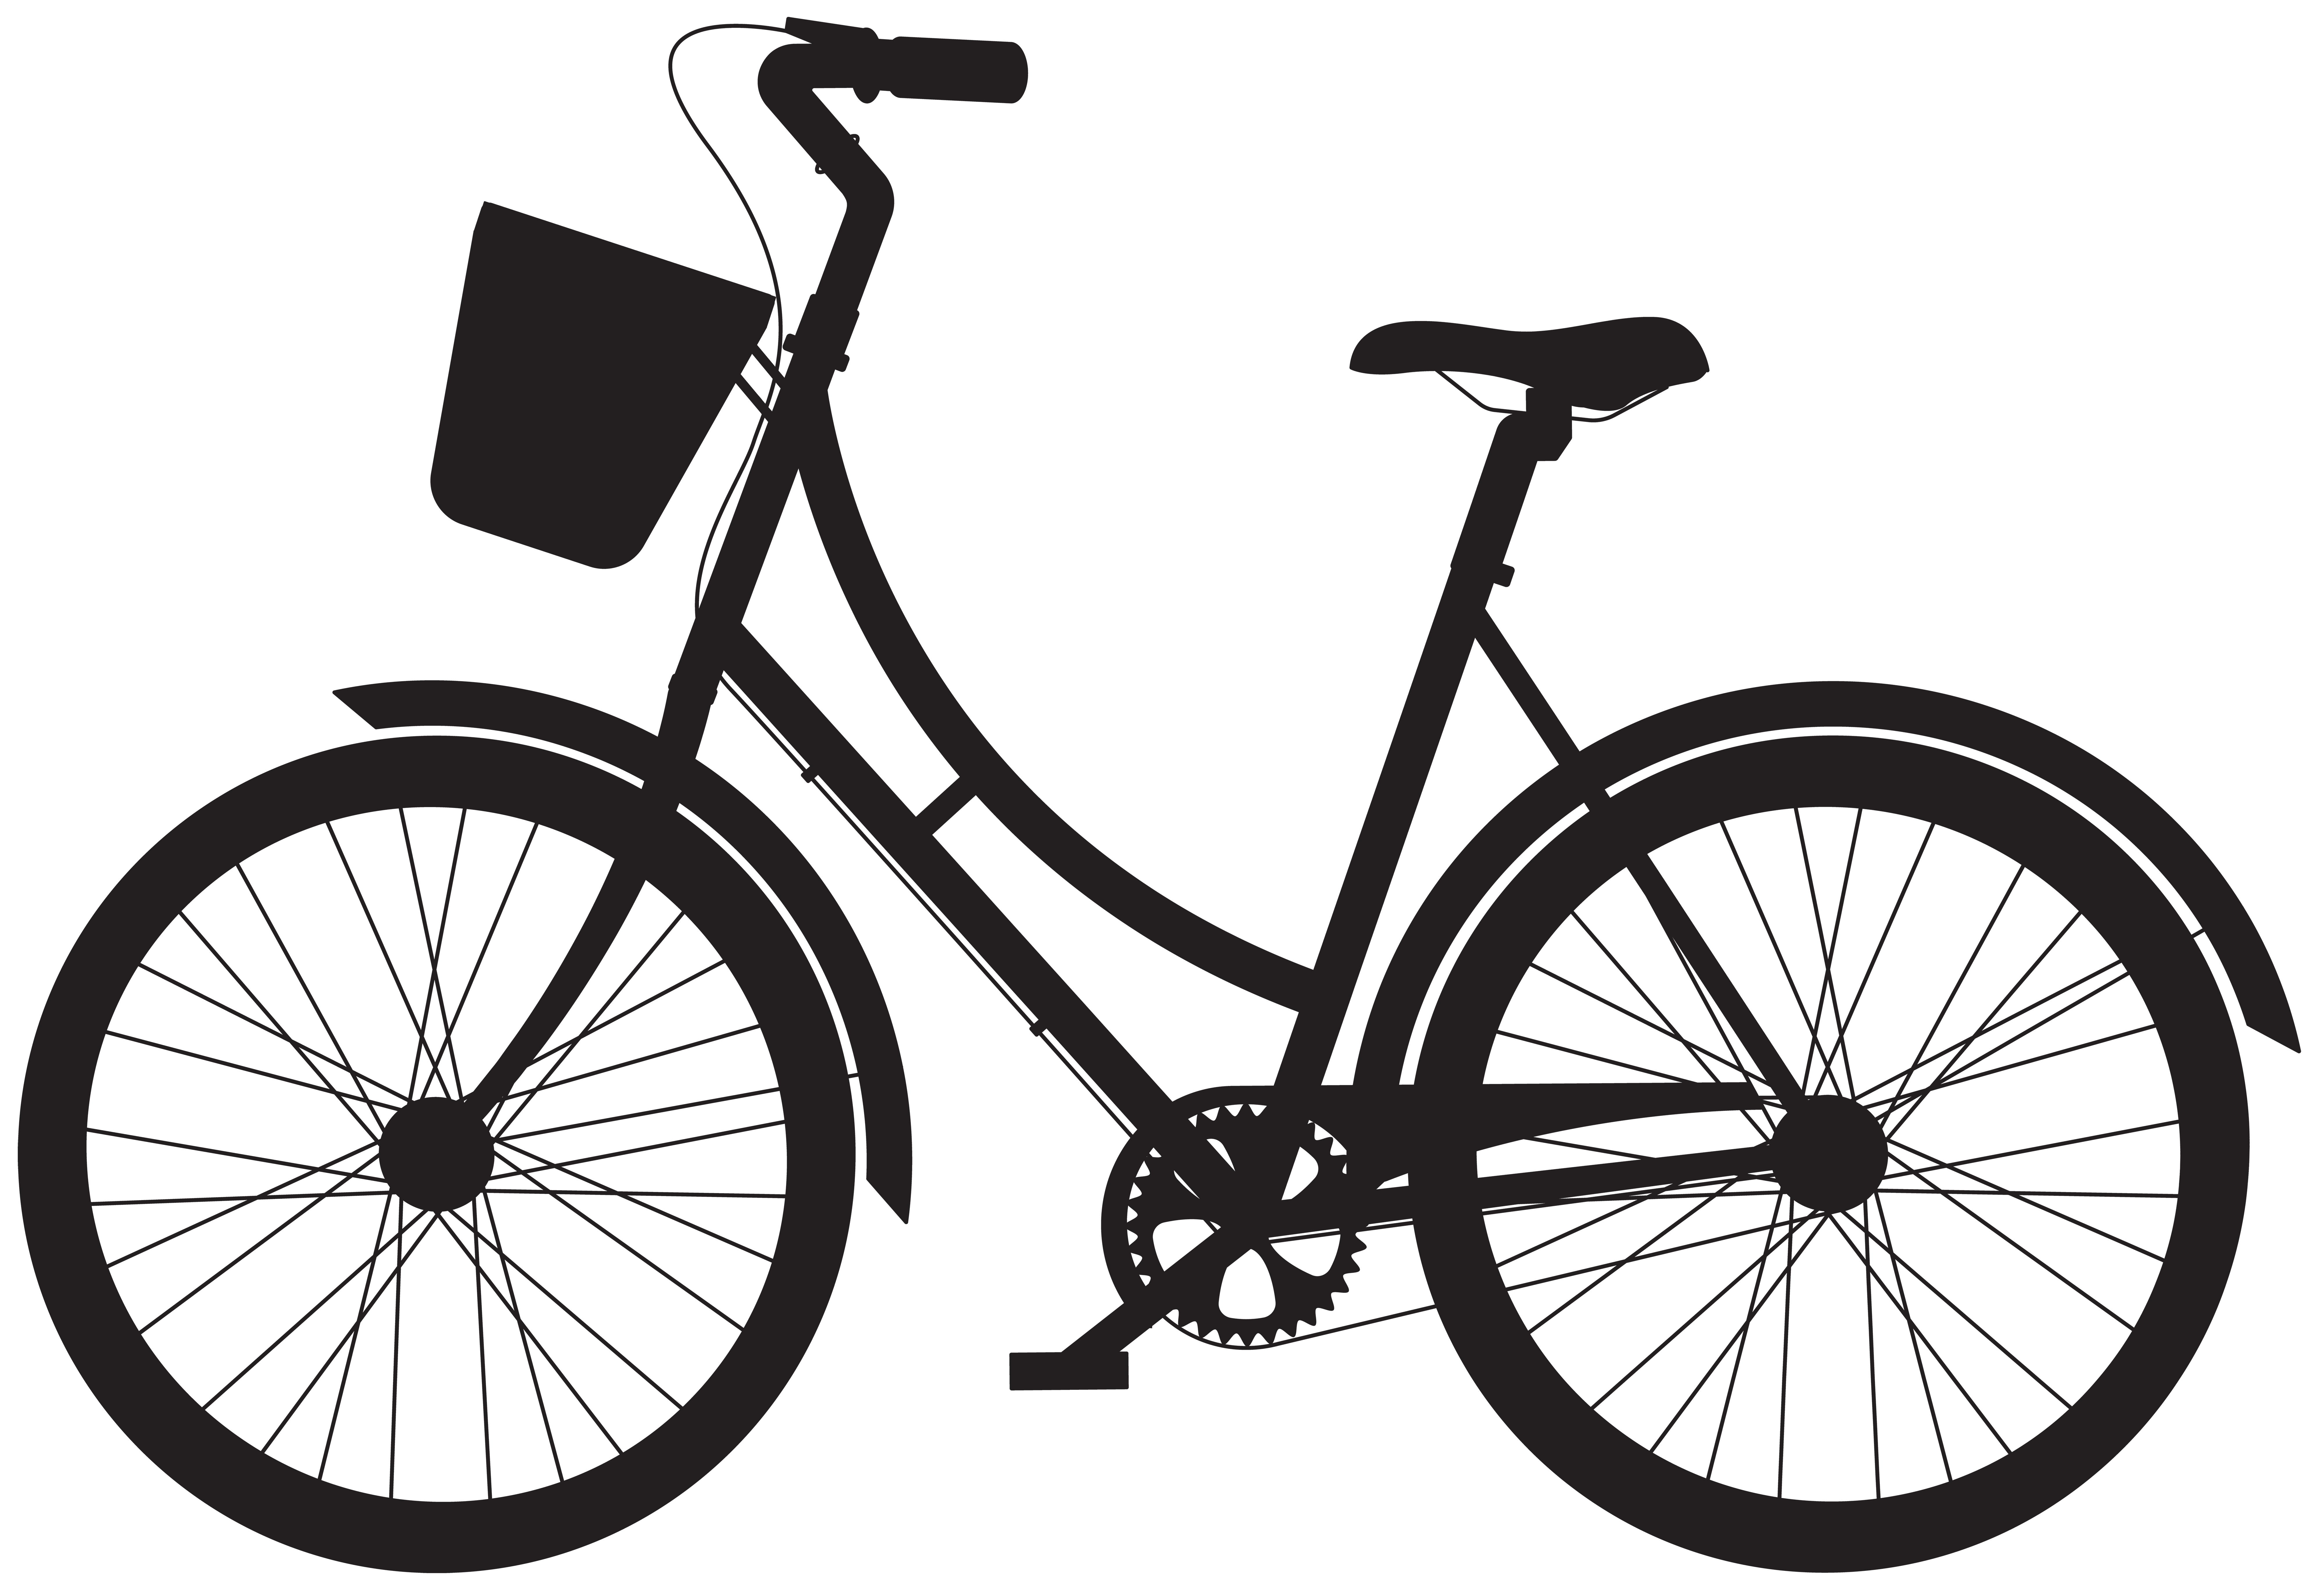 Bicycle with basket.